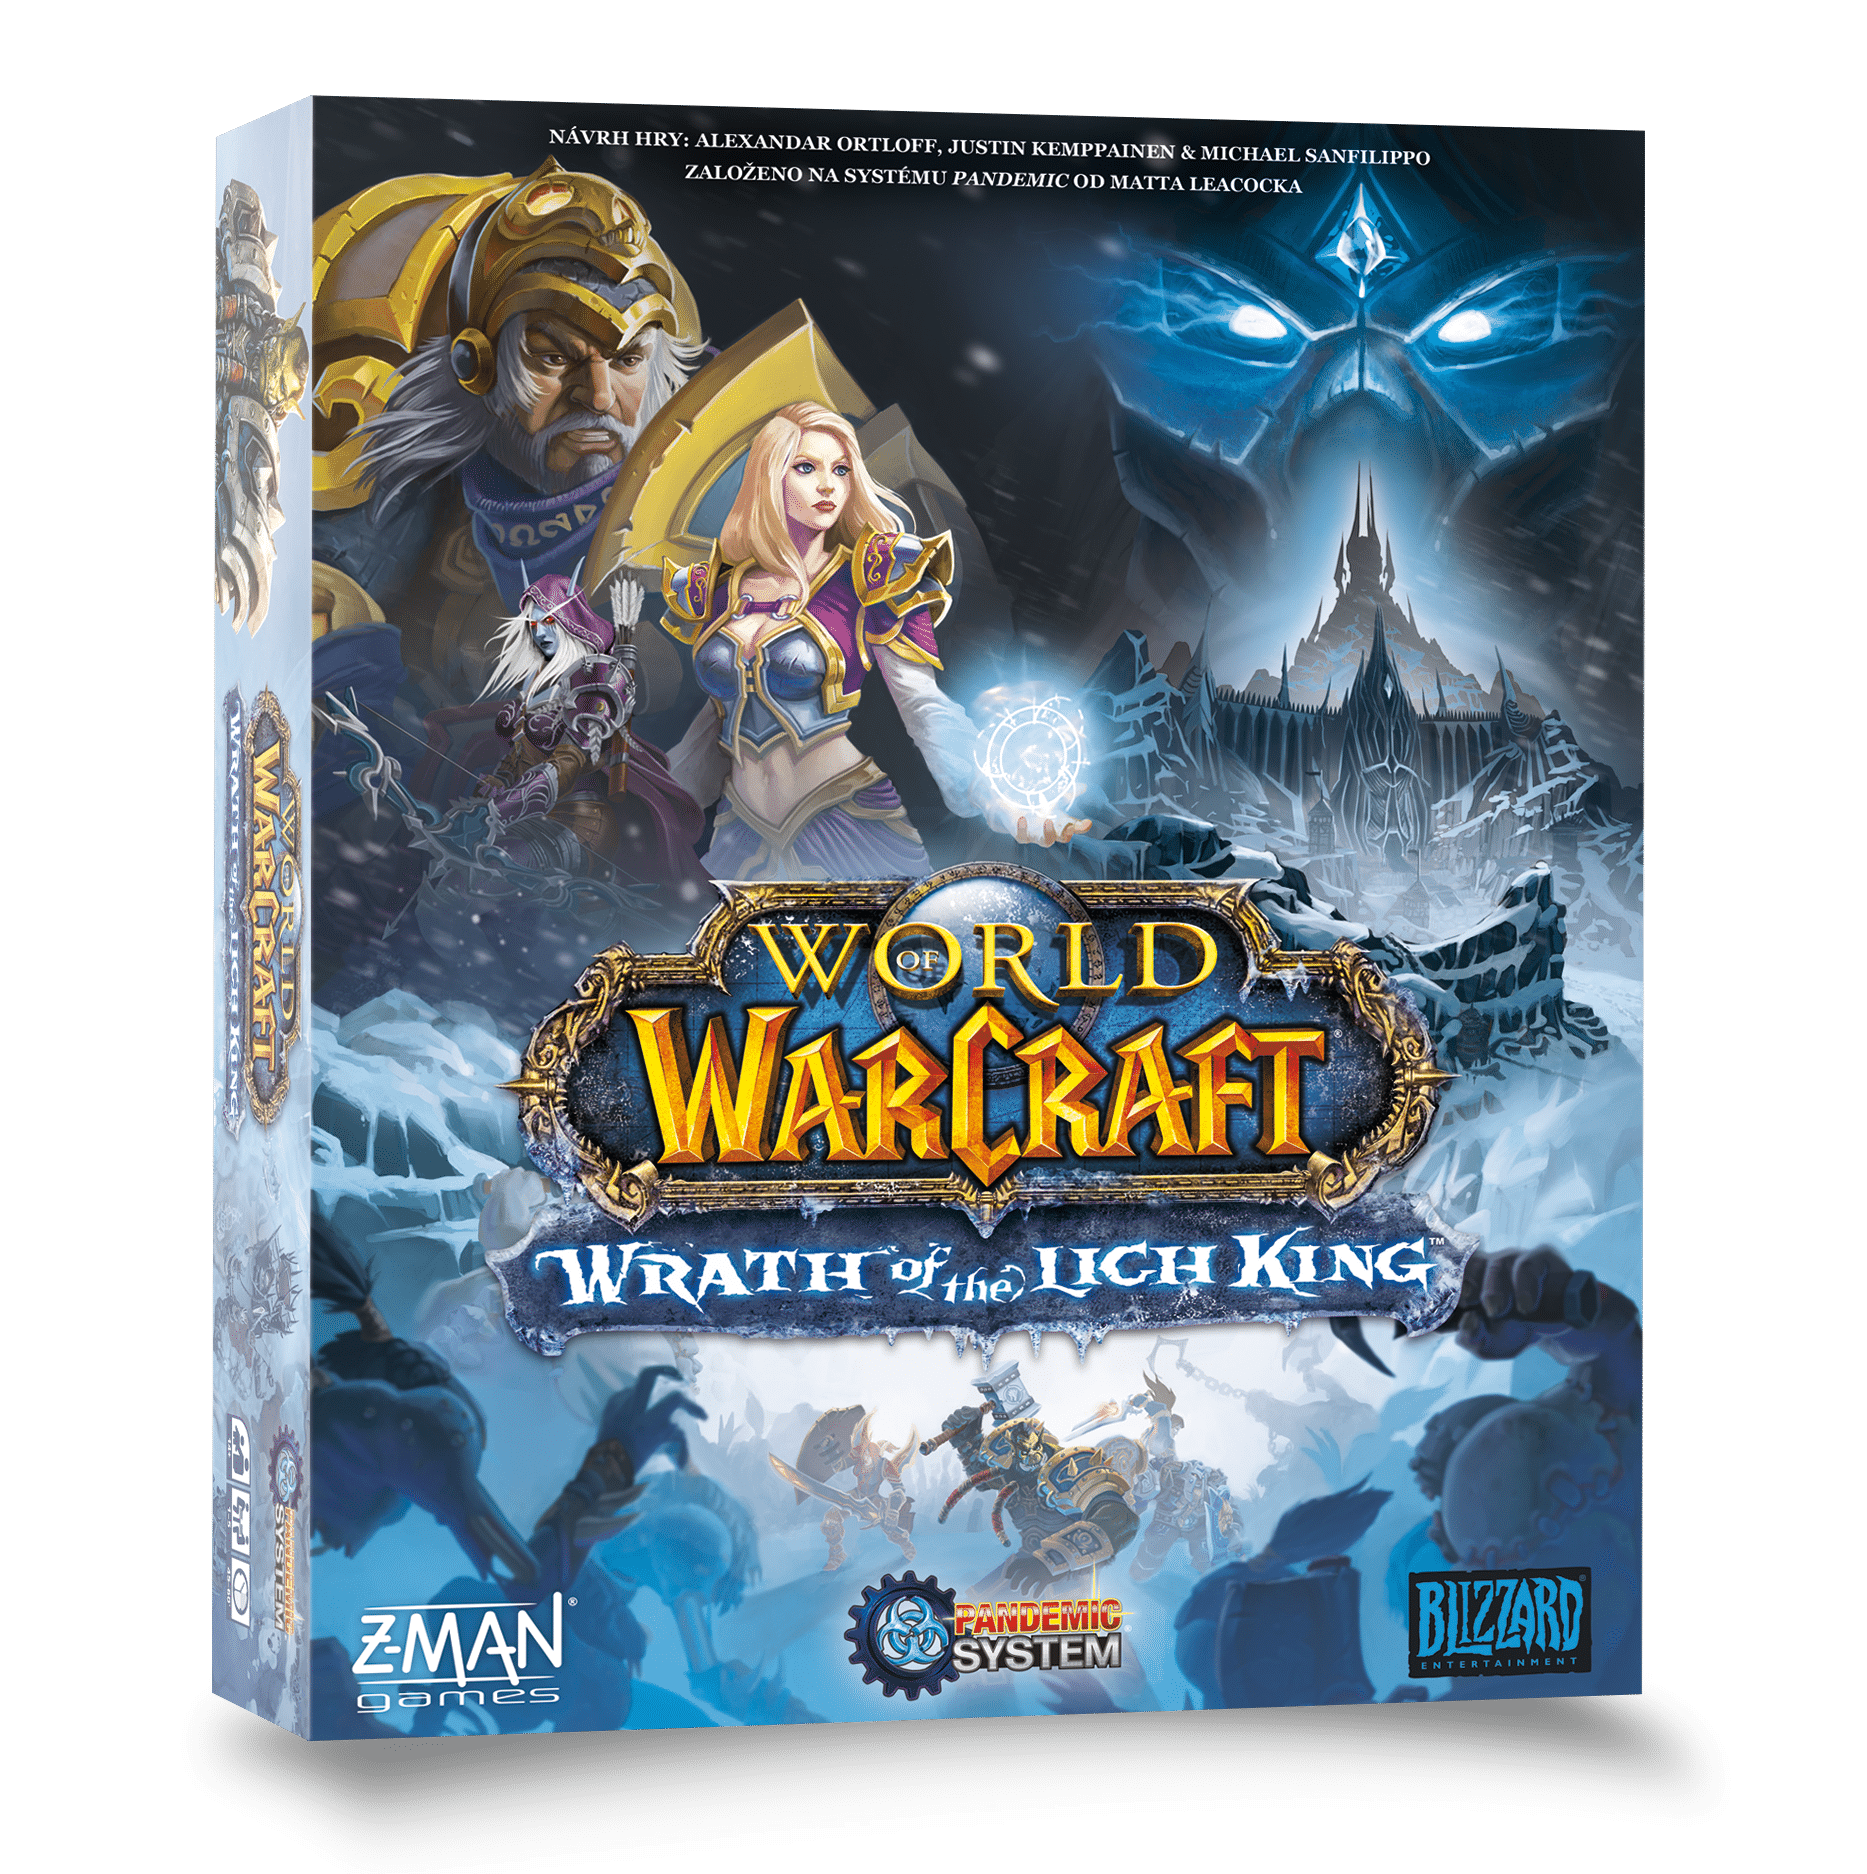 World of Warcraft Wrath of the Lich King – A Pandemic system game cover 2